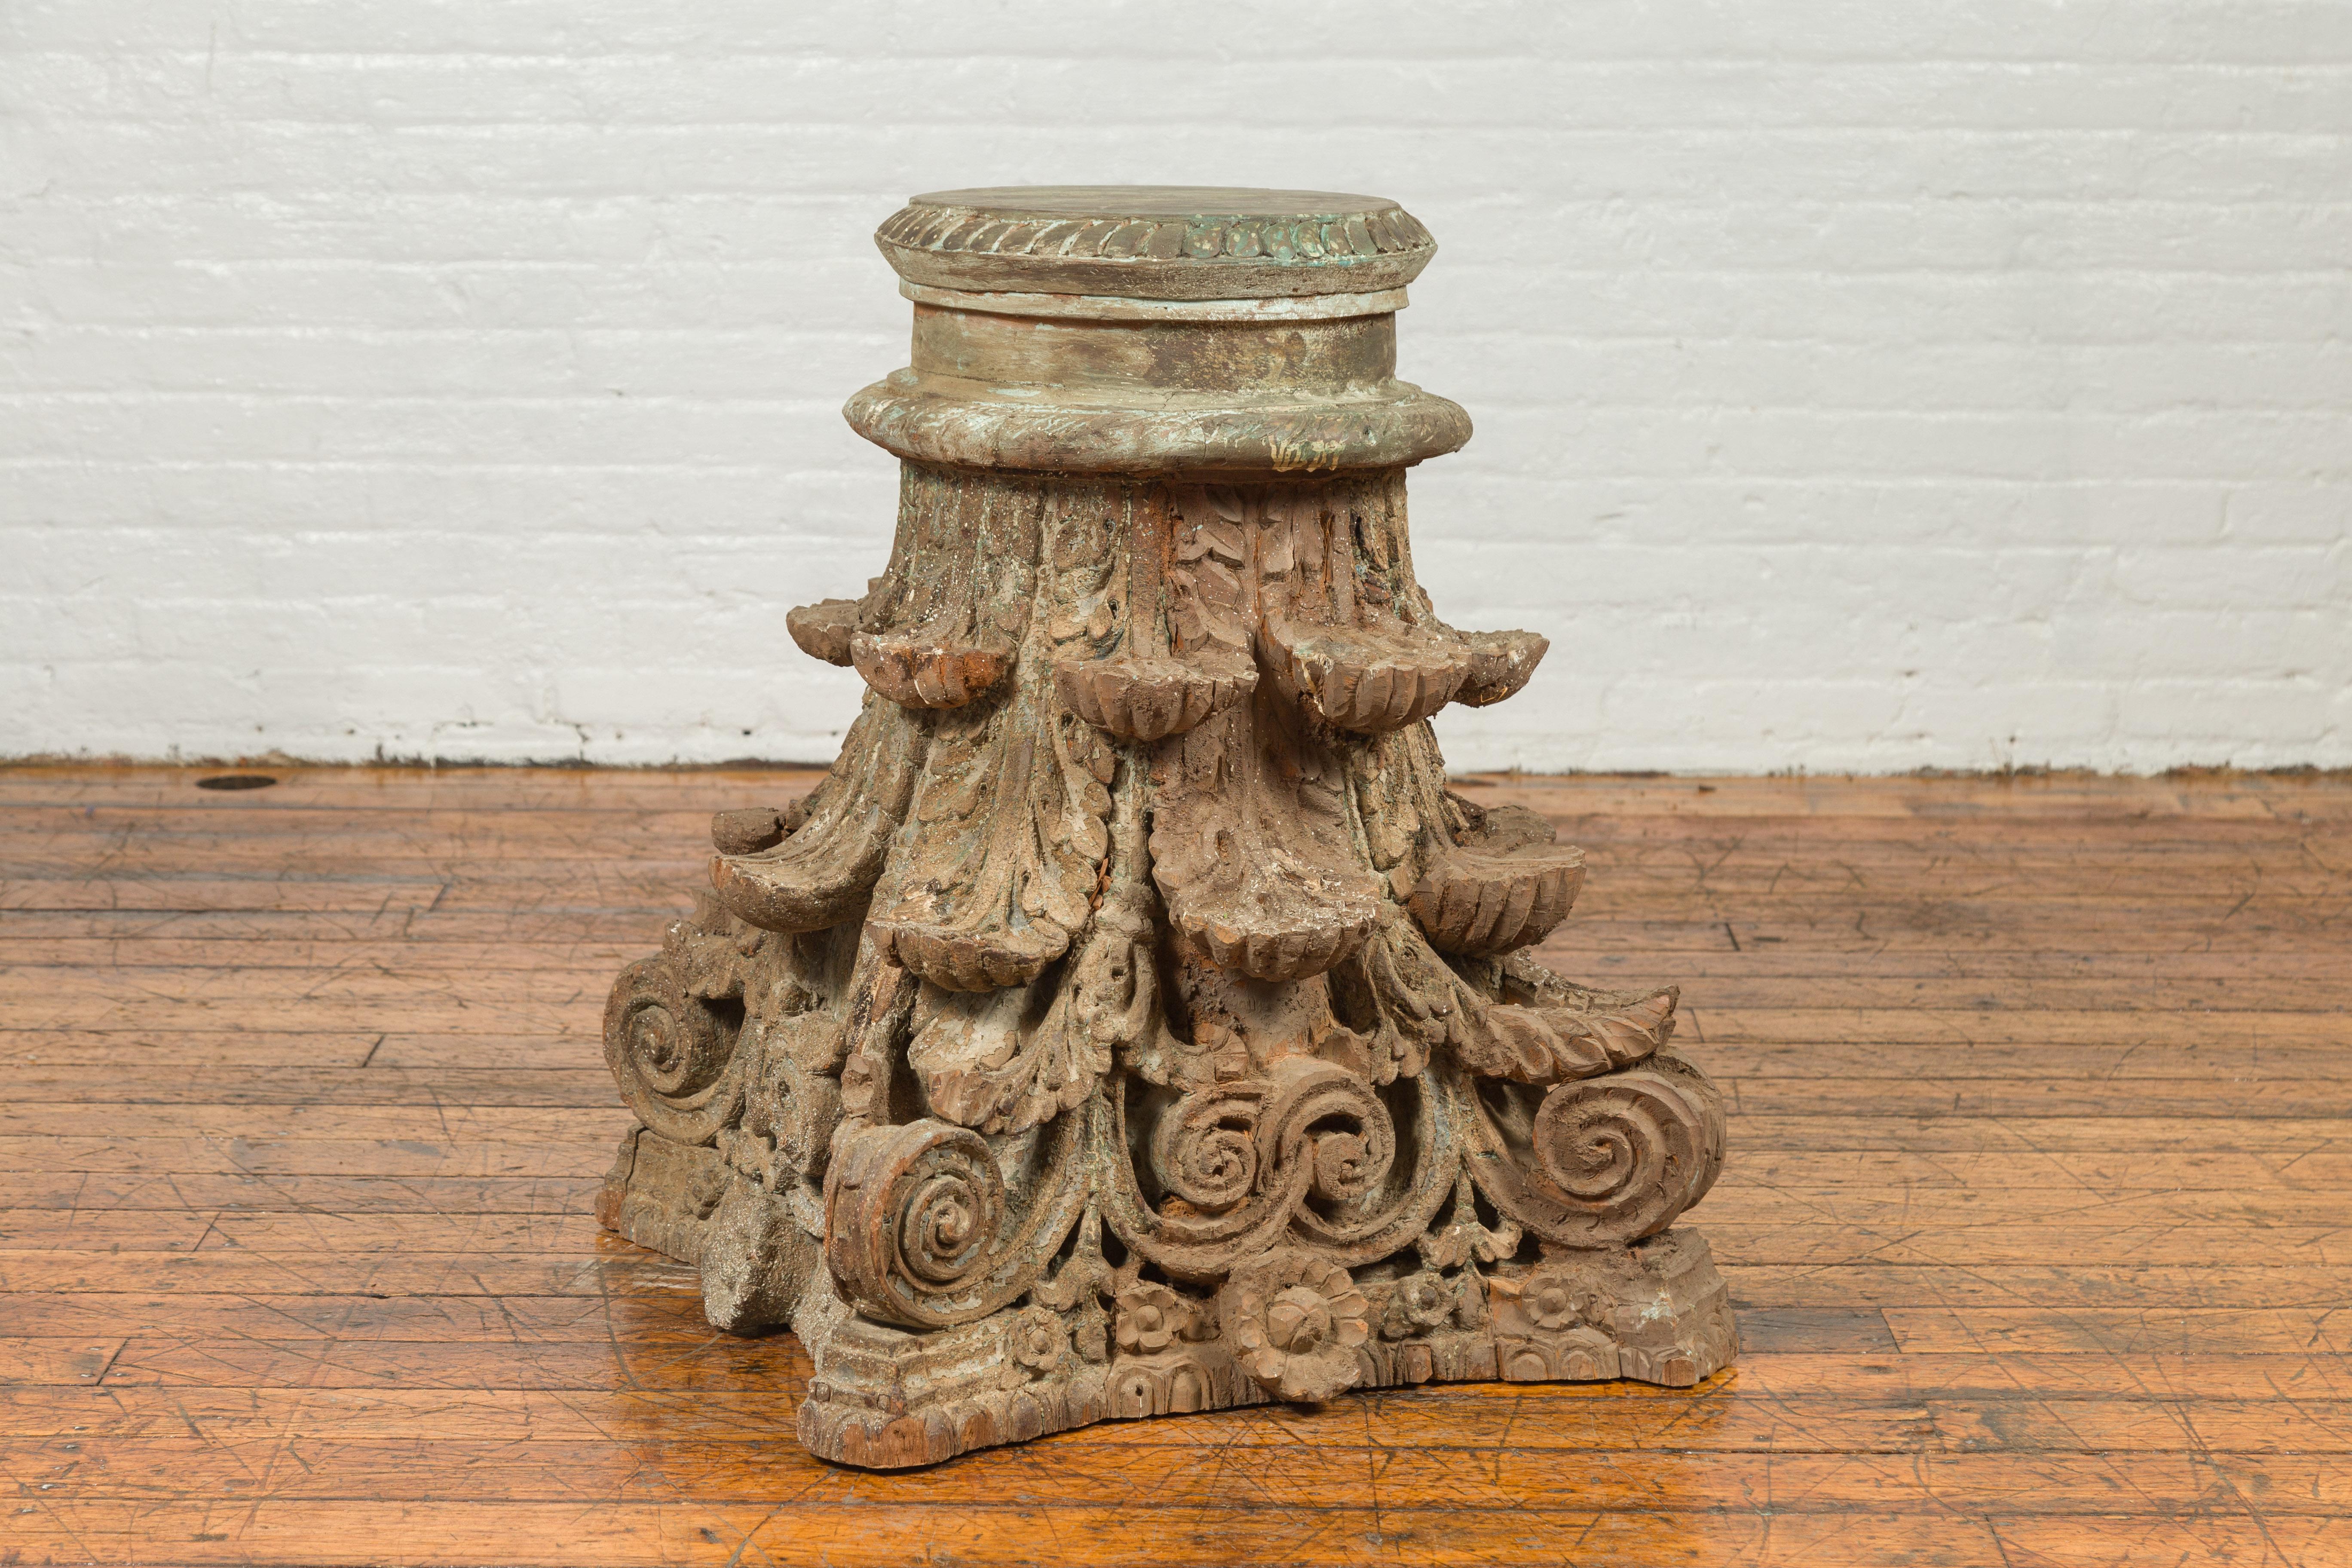 An antique Indian Corinthian temple capital from the 19th century, with distressed patina. Created to adorn the exterior of an Indian temple, this Corinthian capital will make for an exquisite decorative addition in any home. Boasting a nicely